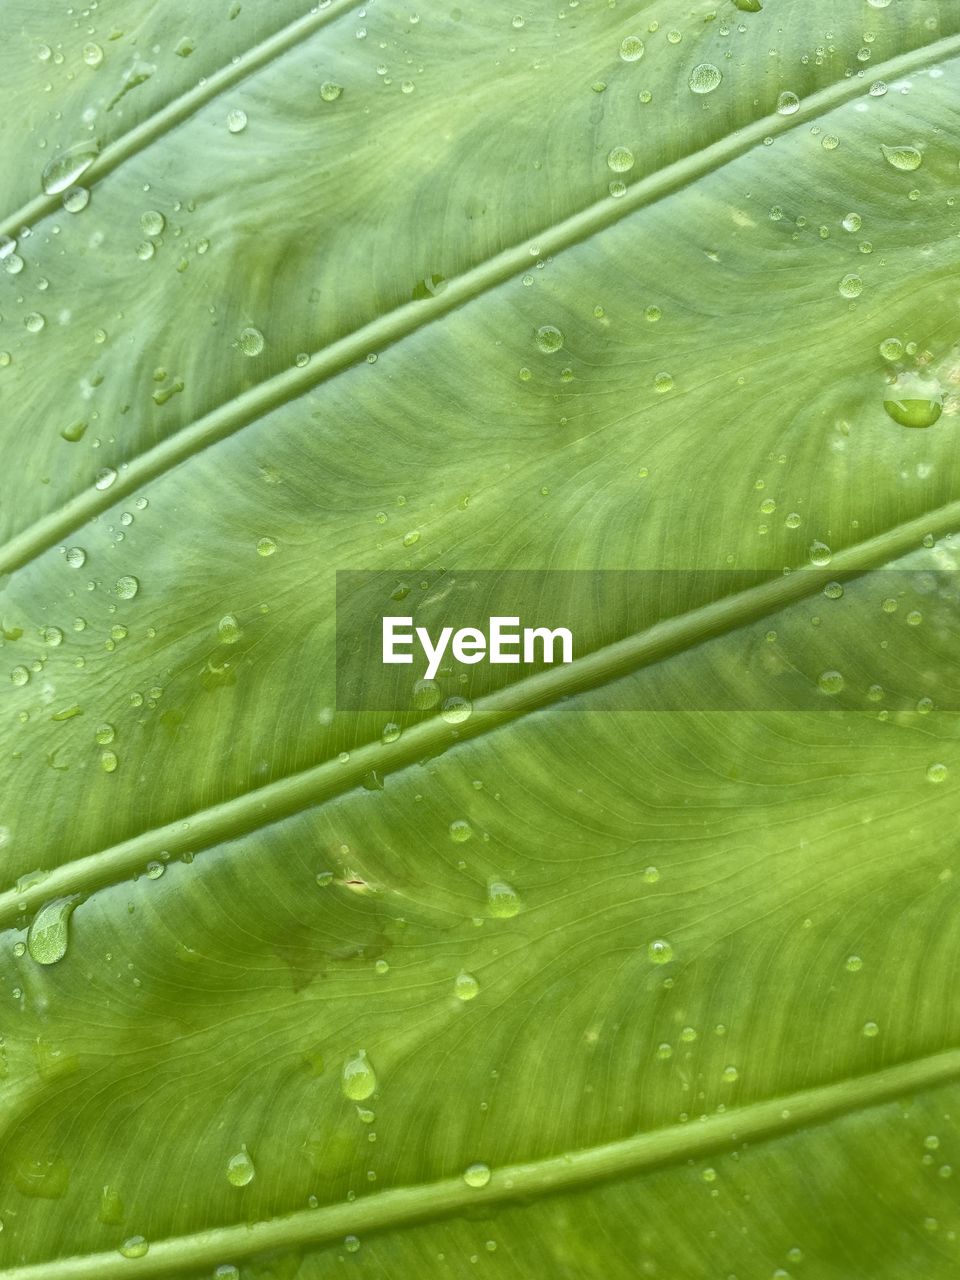 leaf, green, plant part, backgrounds, full frame, close-up, drop, no people, leaf vein, plant, nature, wet, pattern, growth, beauty in nature, freshness, water, plant stem, textured, flower, outdoors, fragility, macro, day, botany, extreme close-up